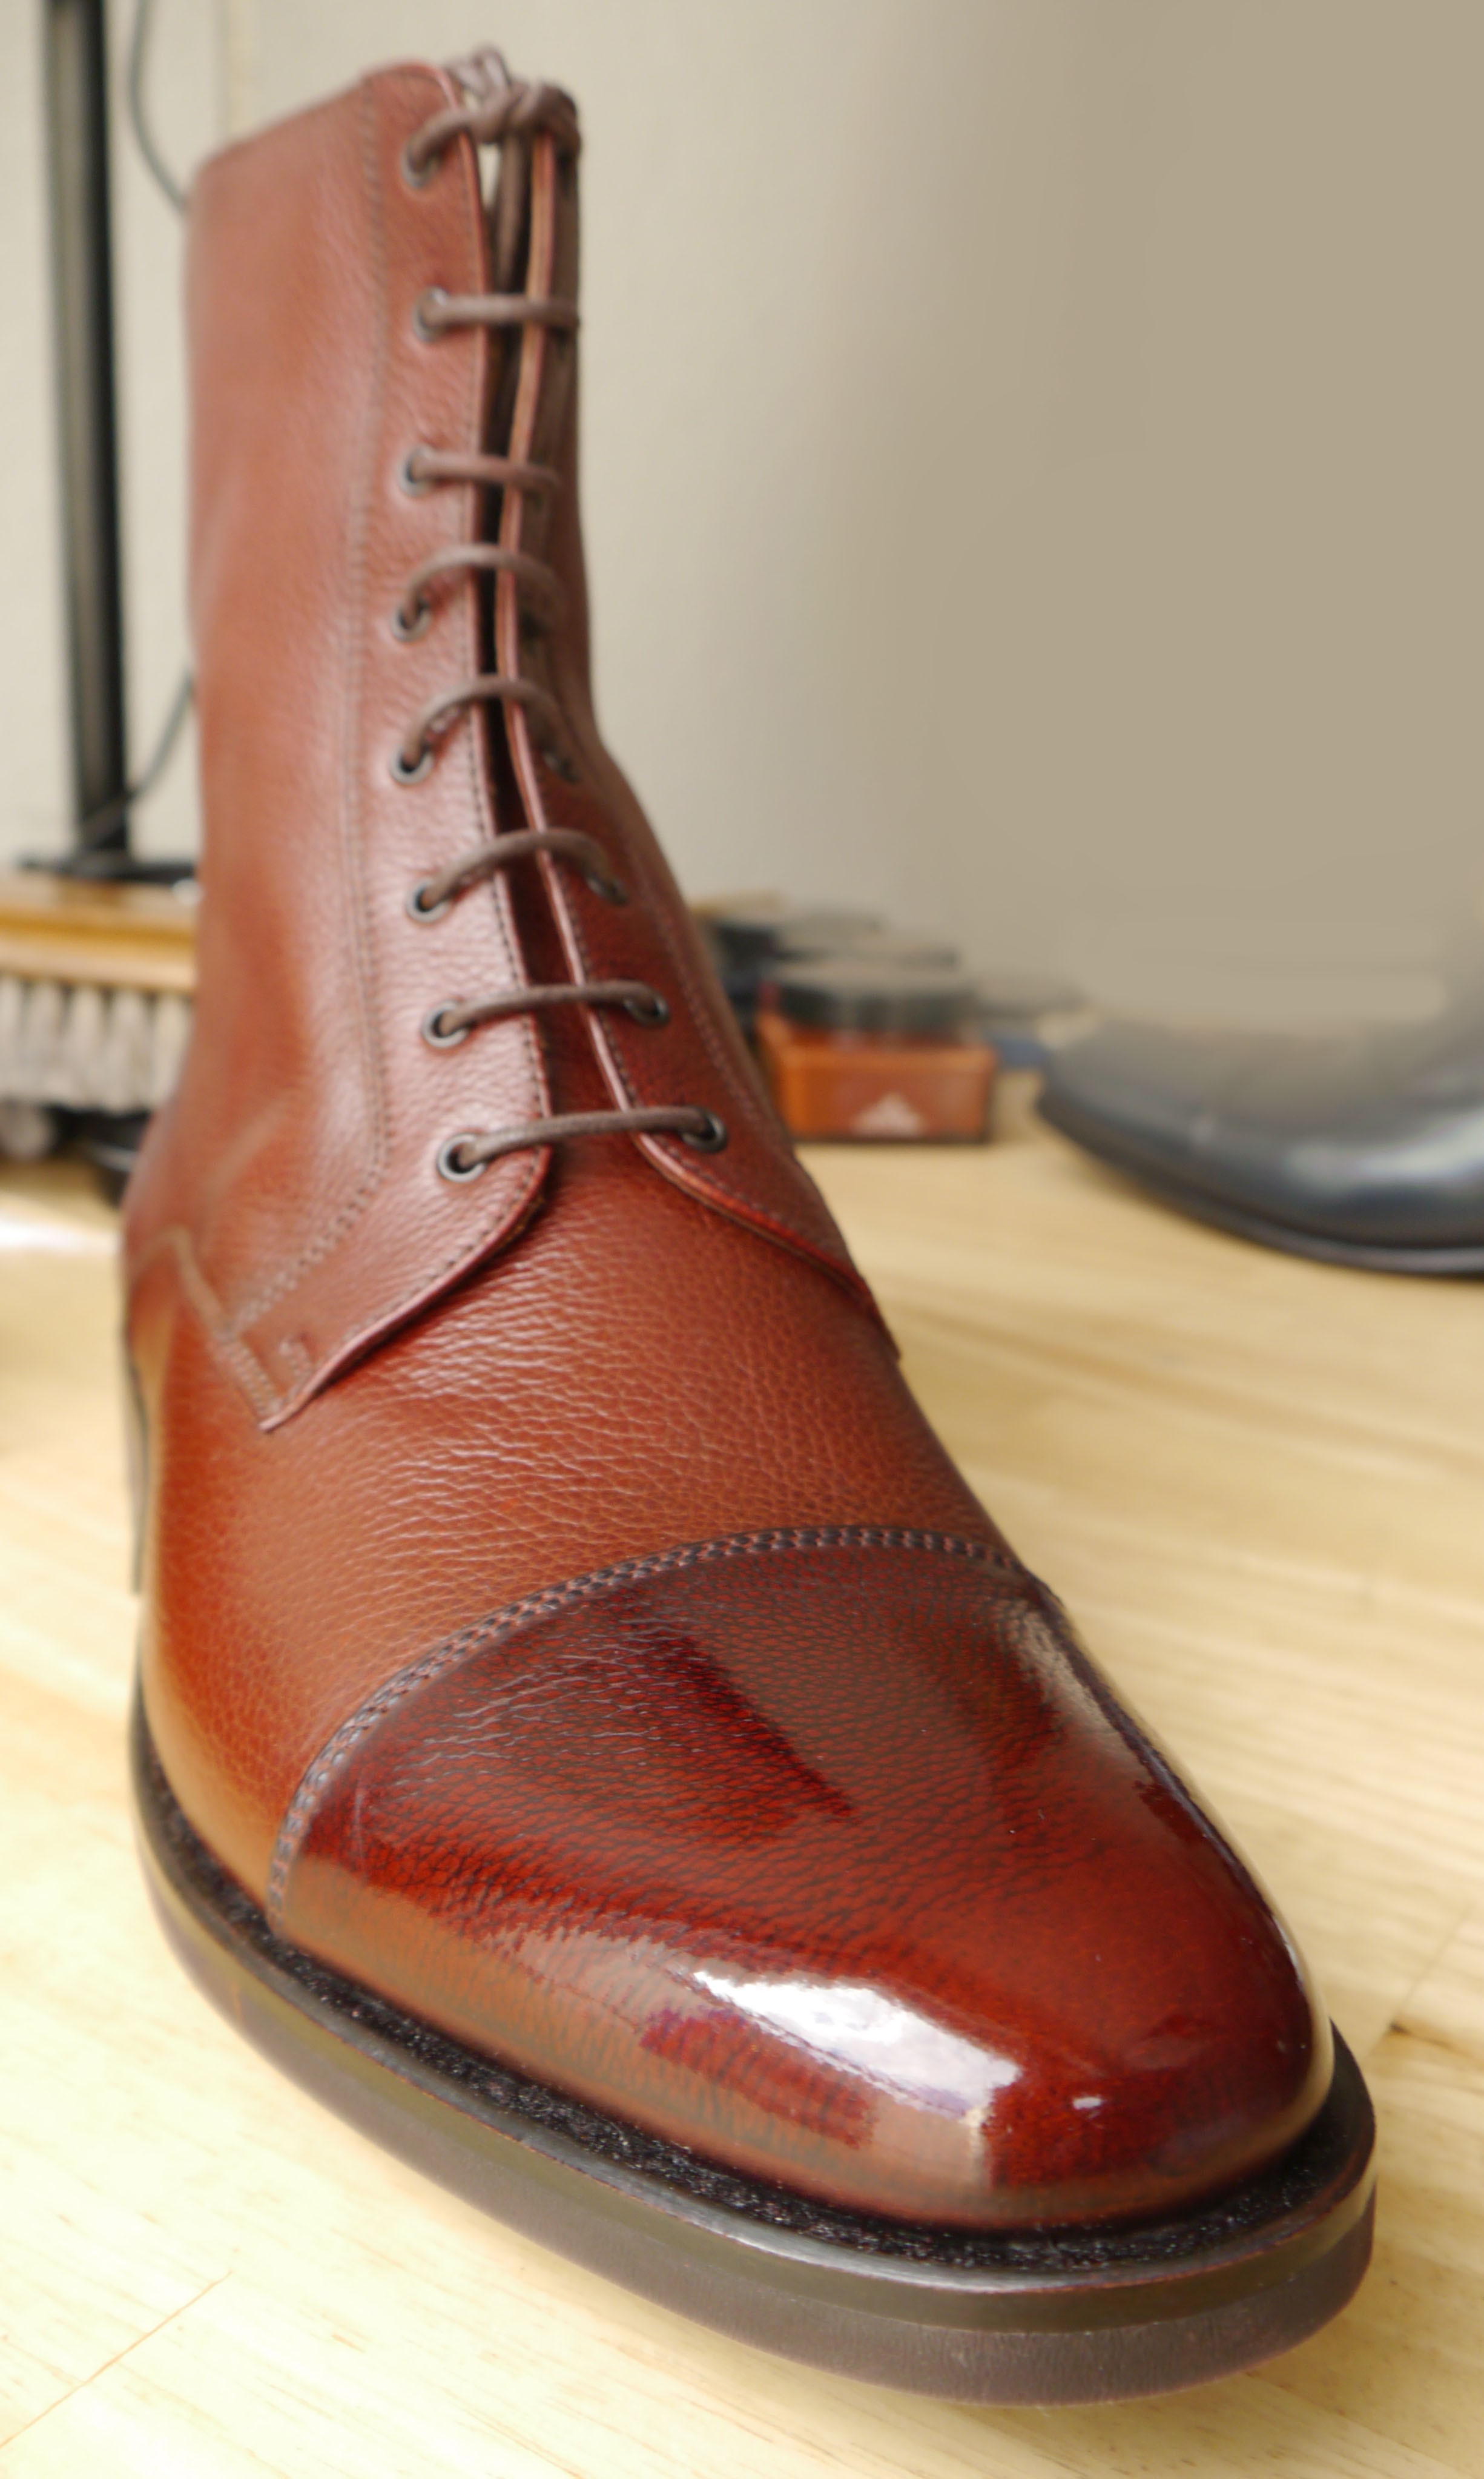 Changing the color of smooth leather shoes - Valmour 